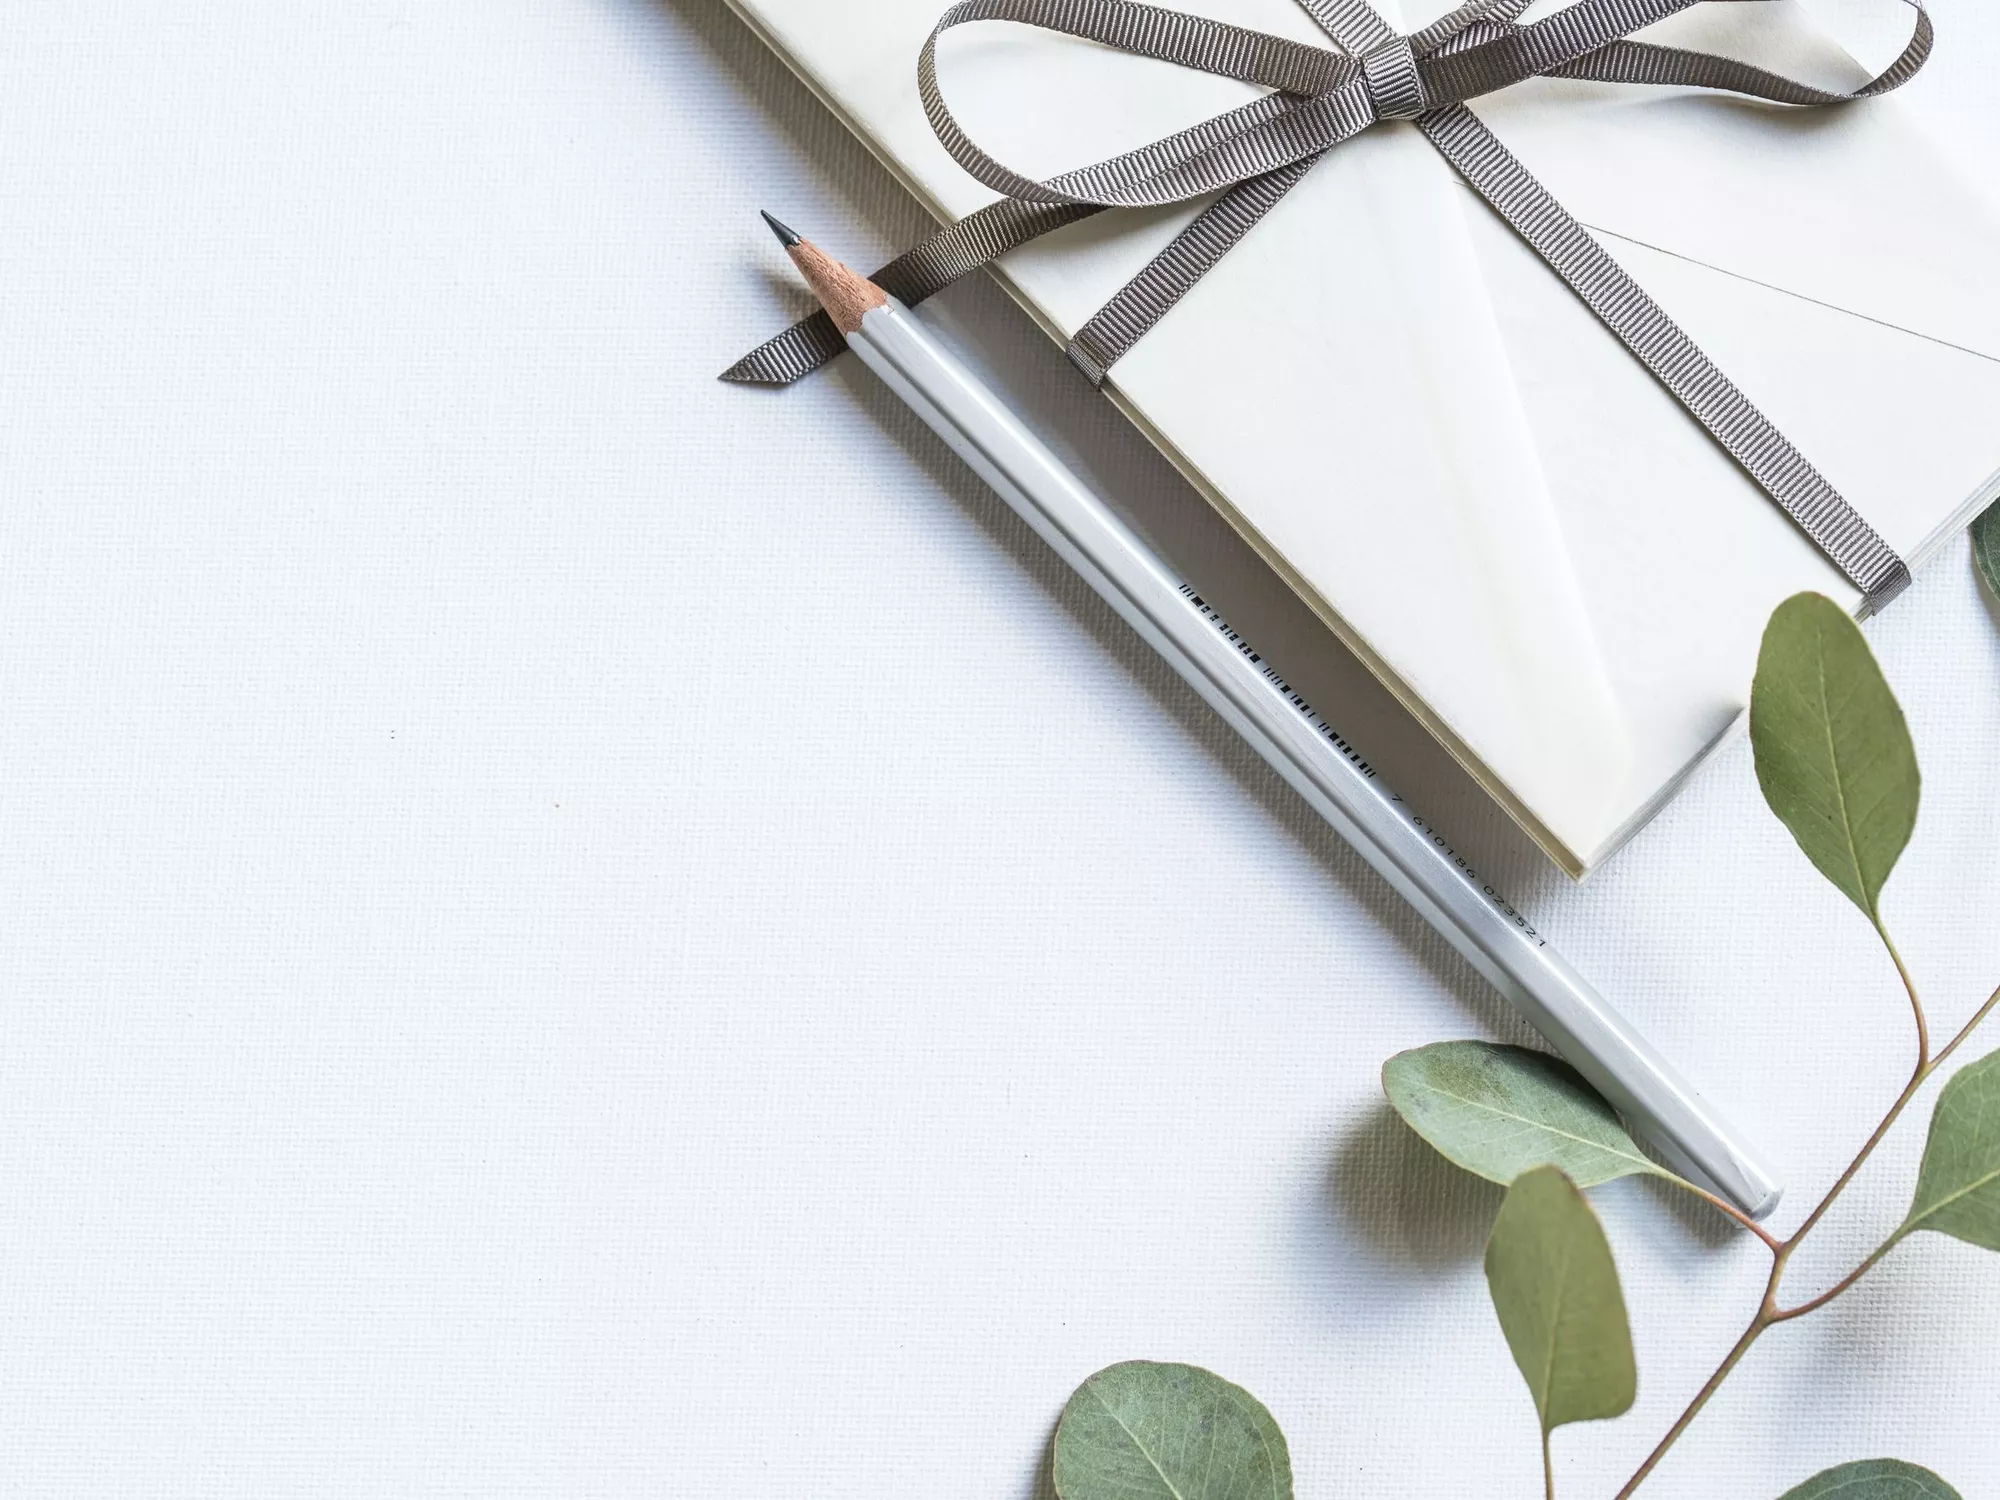 White envelope with gift ribbon, a pencil and a branch with green leaves to illustrate a voucher (c) Photo Joanna Kosinska / Unsplash